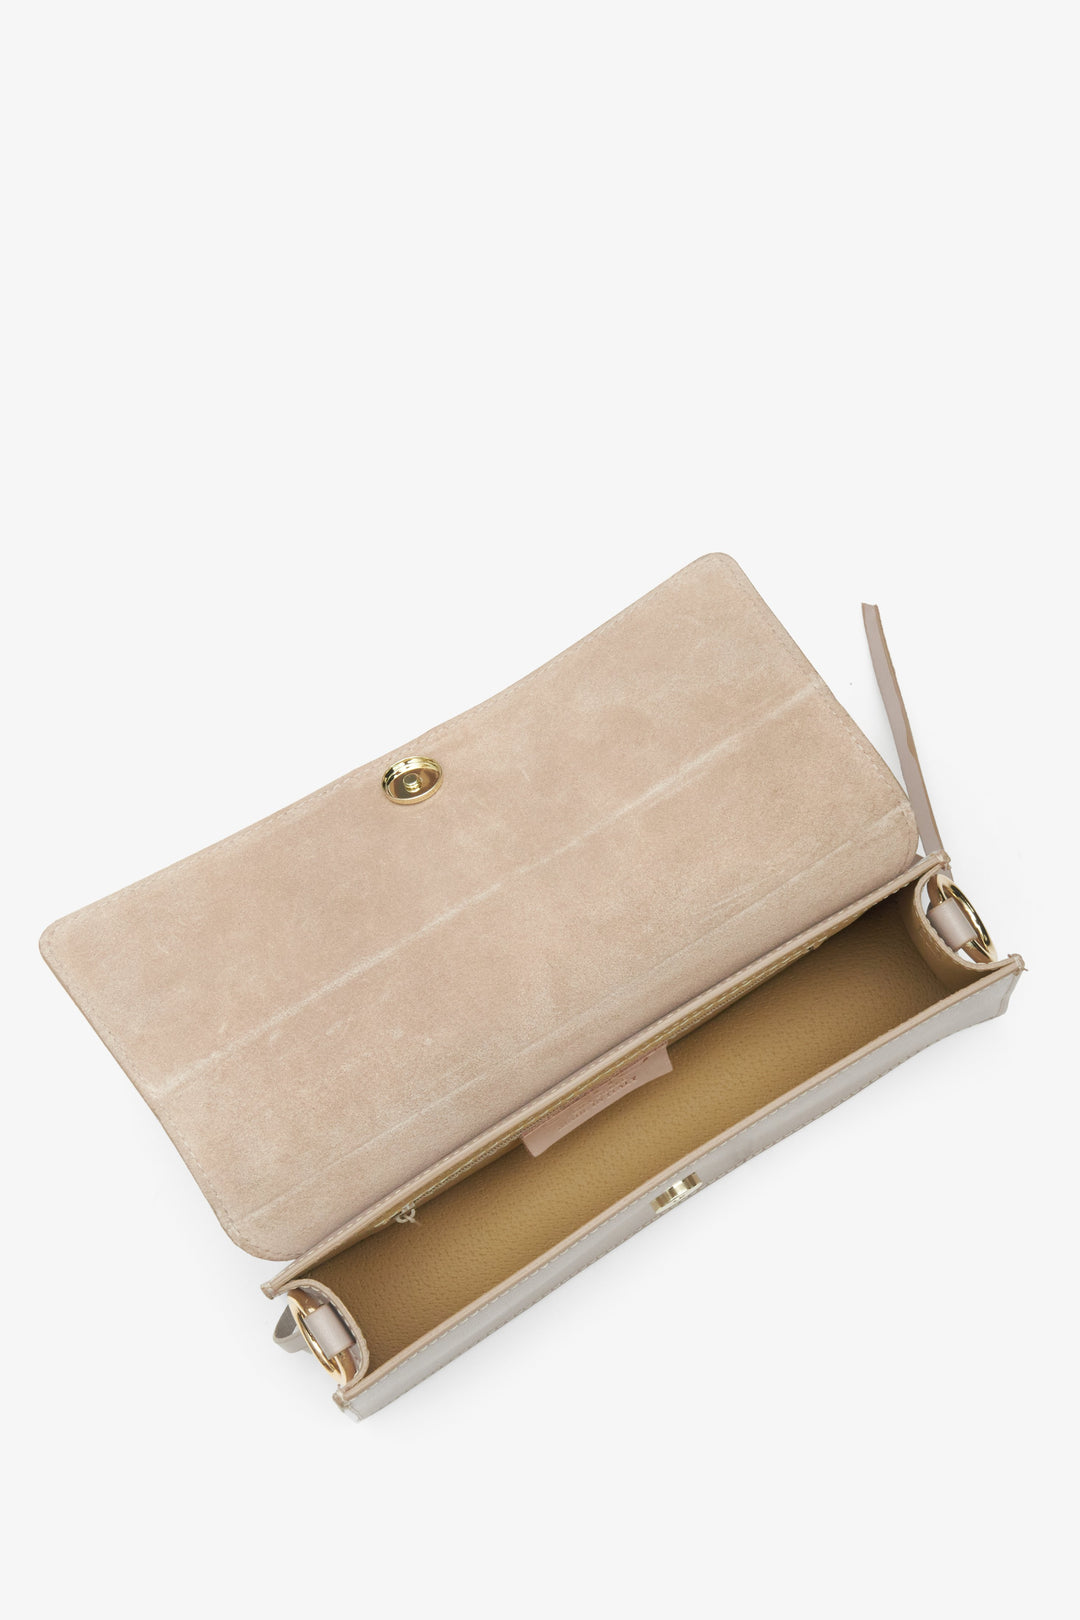 Women's beige leather handbag - a close-up on the main compartment.